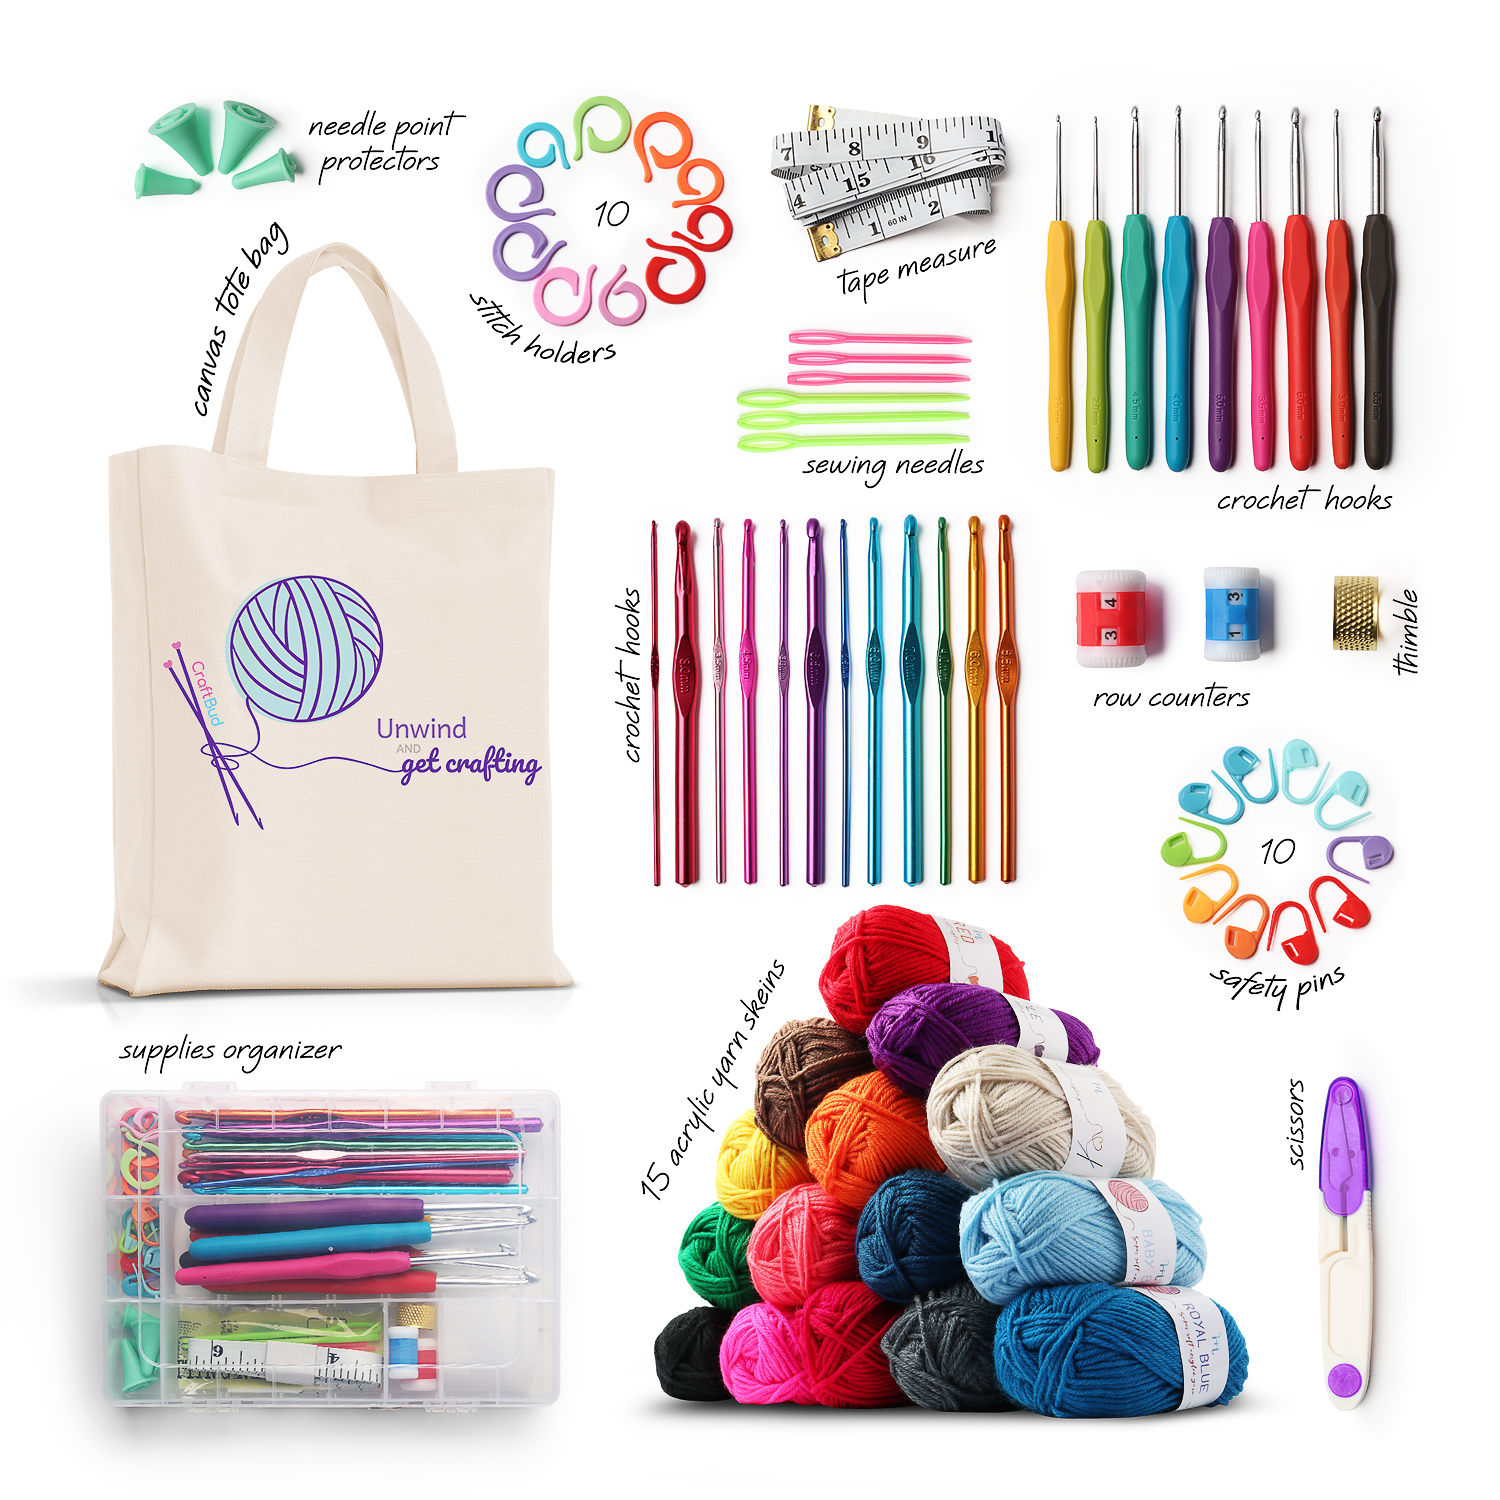 Craftbud 73 Piece Beginners Crochet Kit with Crochet Hooks Yarn Set, Premium Bundle Includes Yarn Balls, Needles, Accessories Kit, Canvas Tote Bag for Travel - image 3 of 9